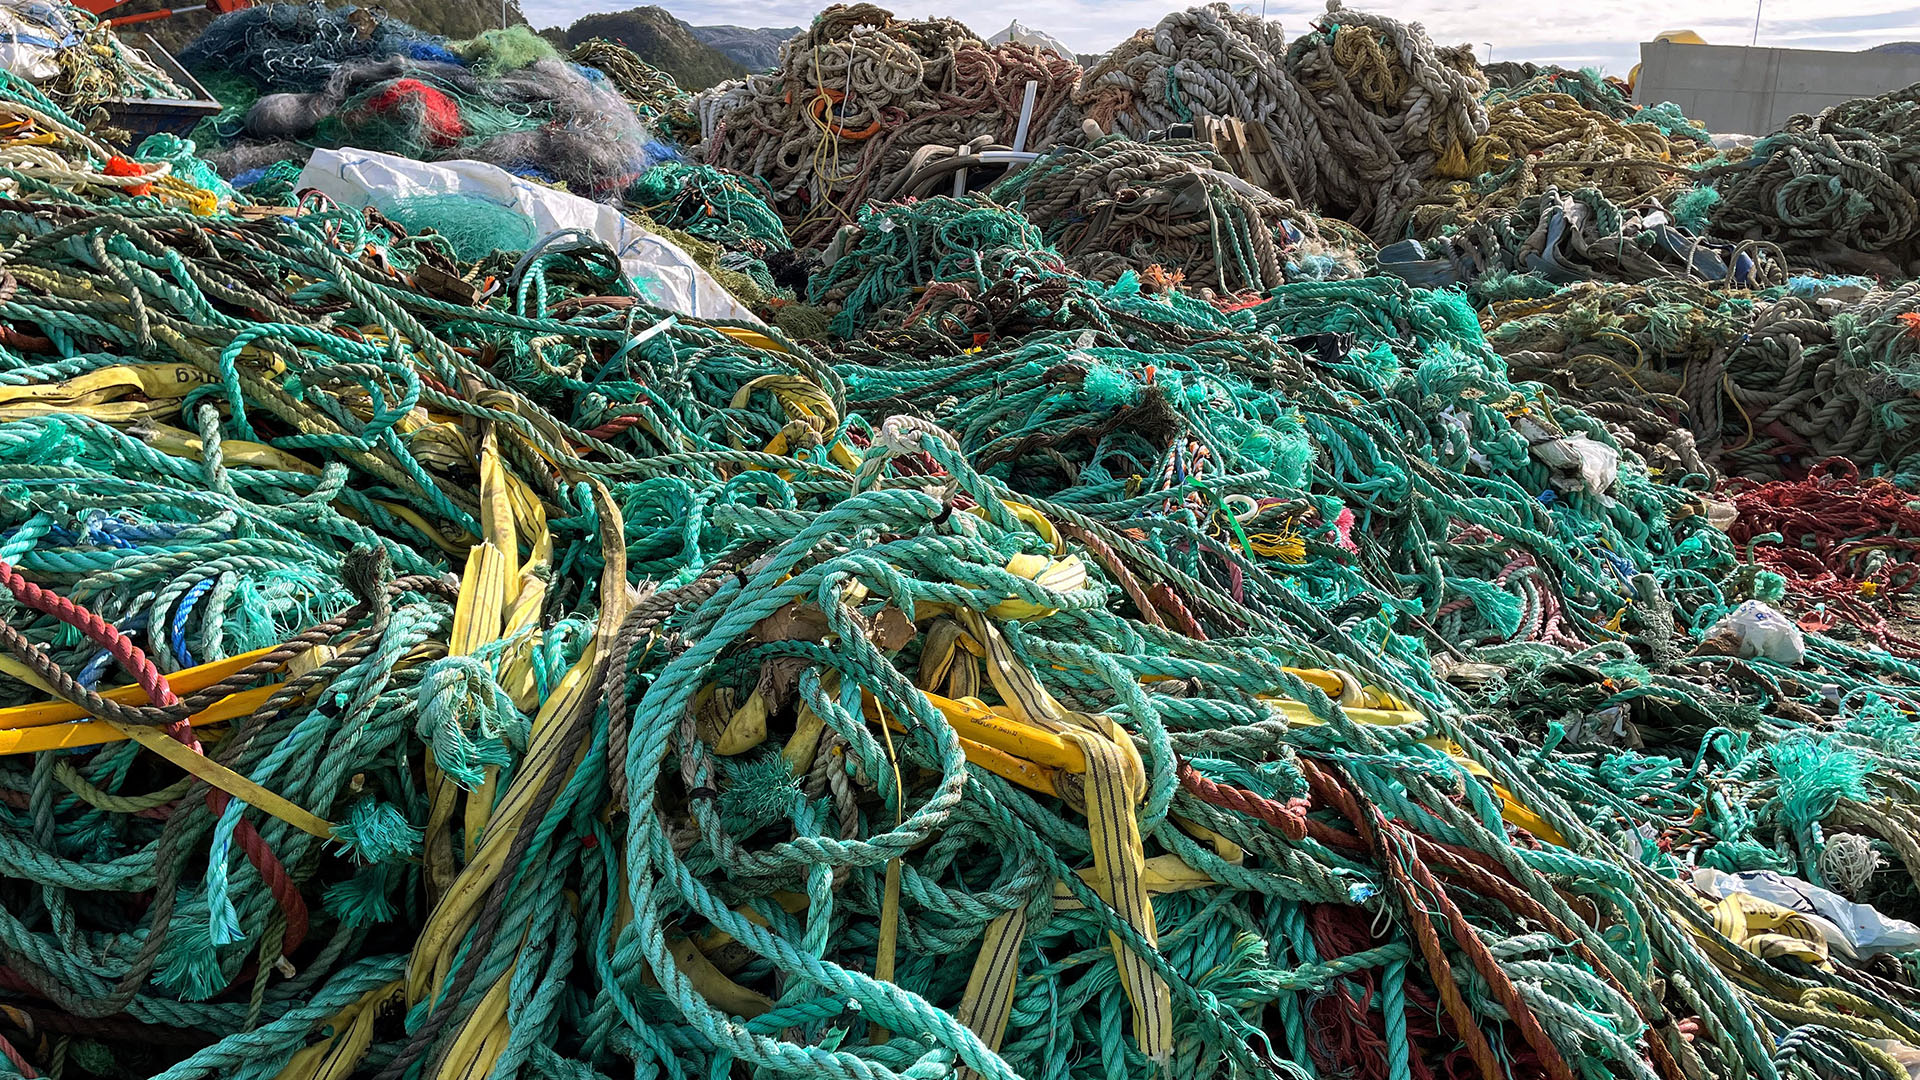 Fishing nets make up almost half of ocean plastic pollution